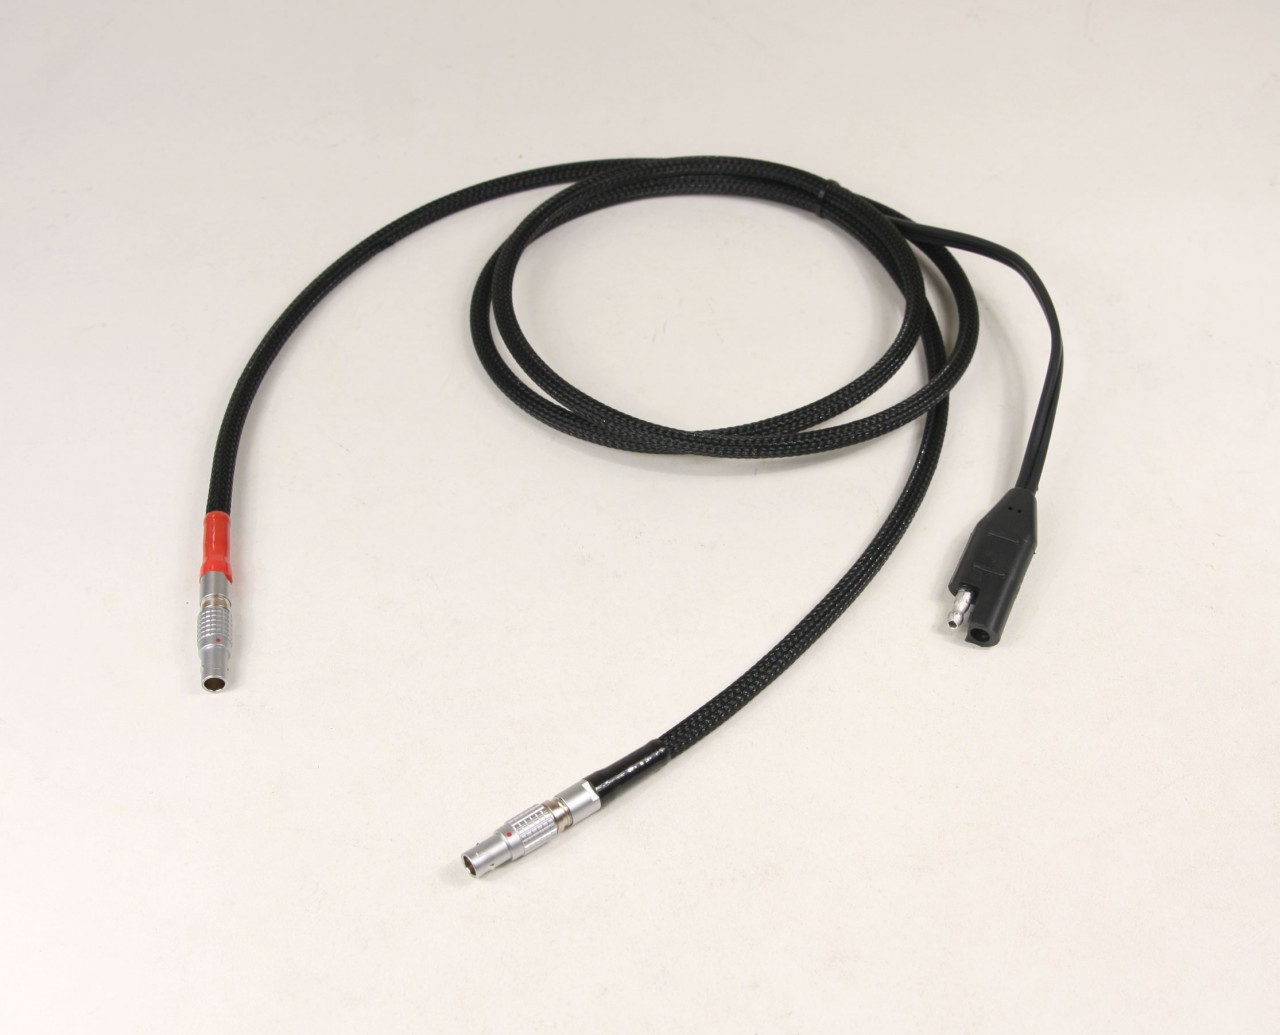 A-00701m - Pacific Crest Data Power Cable